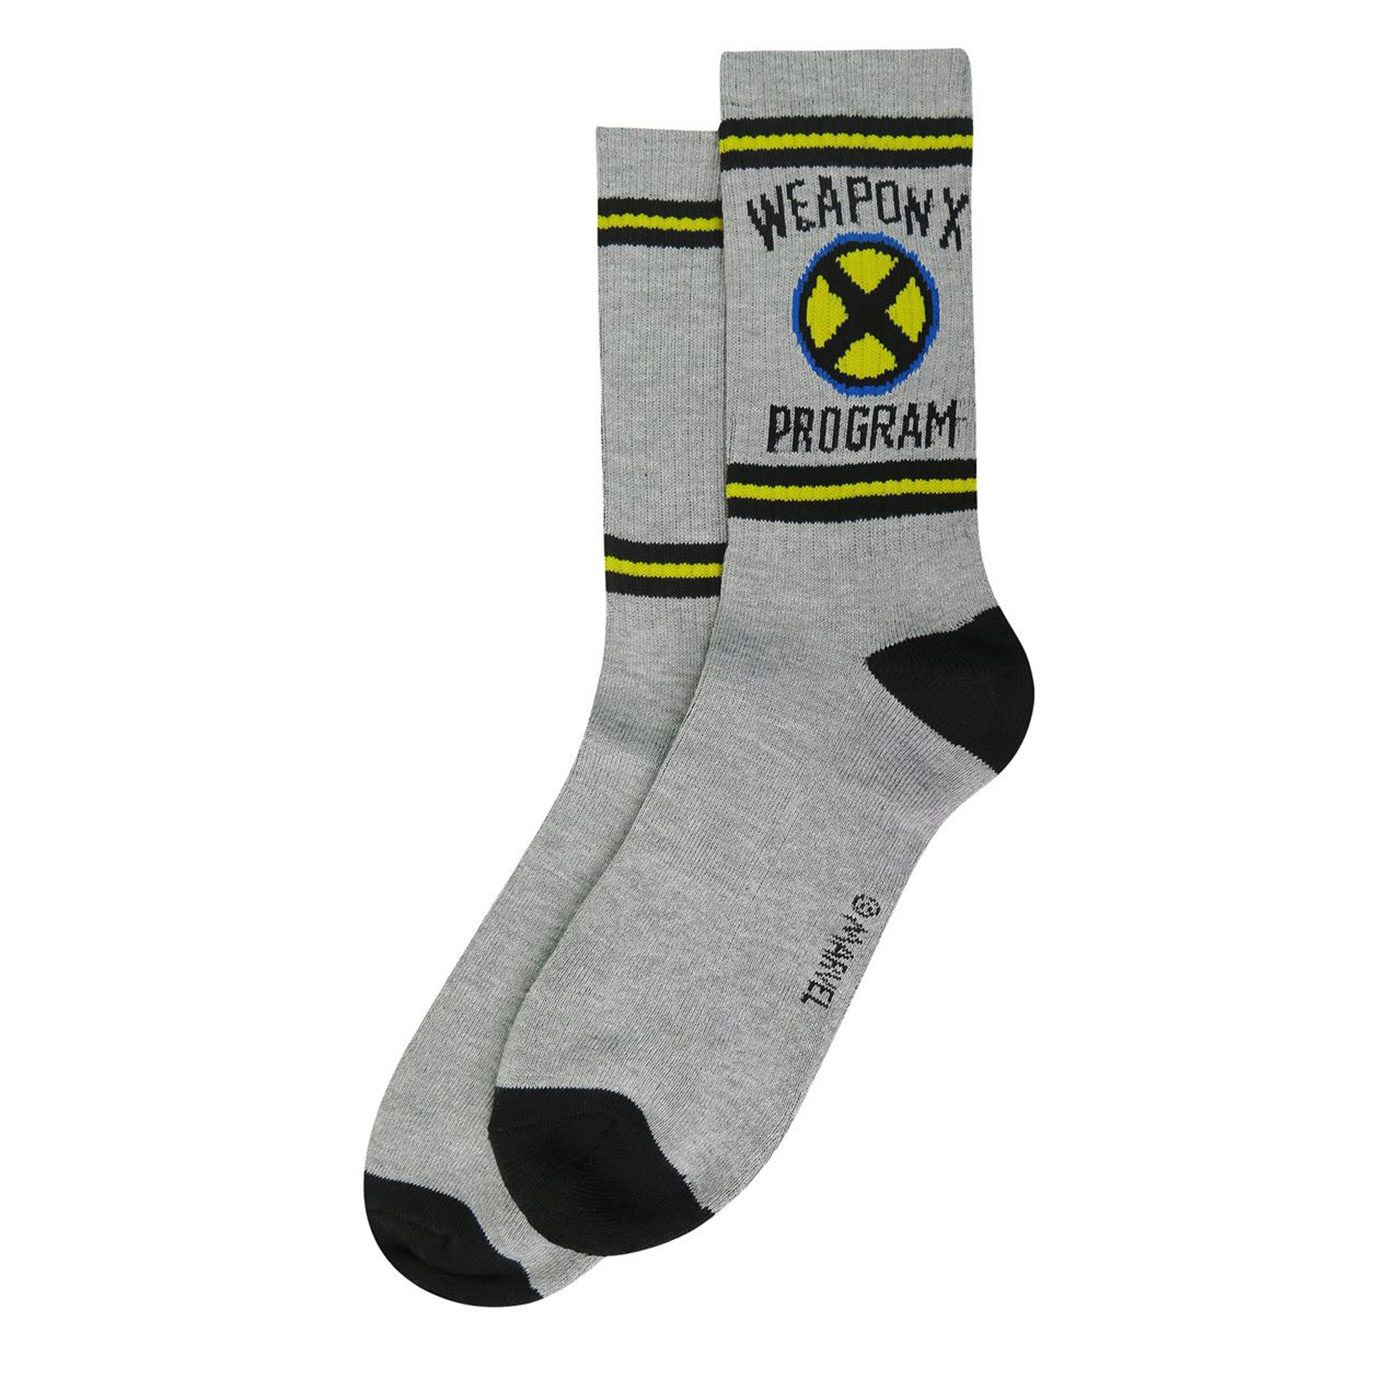 Wolverine Weapon X Sock 2 Pack